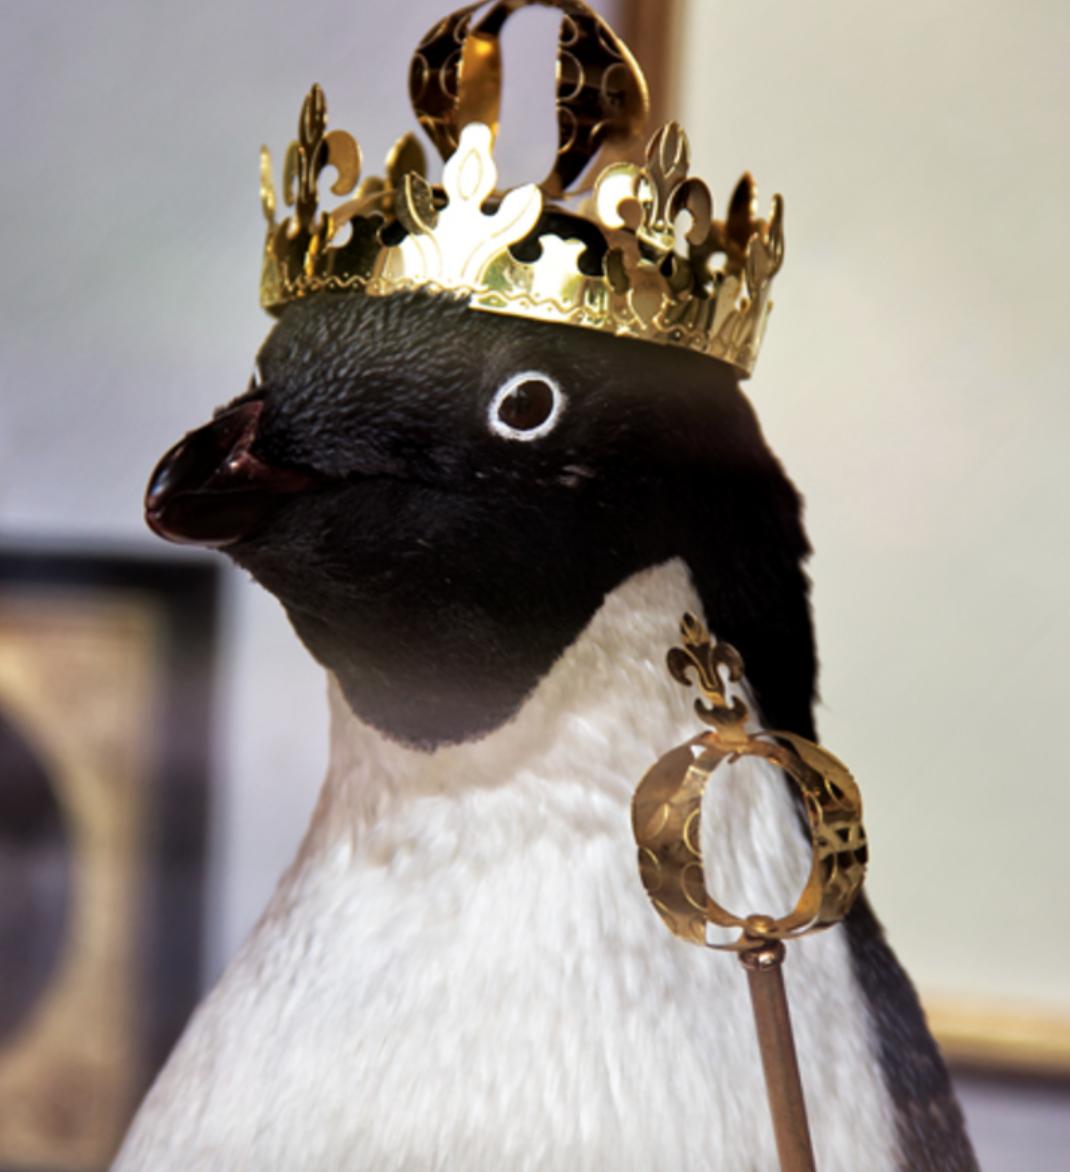 VOICE ACTORS — looking for one person to play this royal penguin. Info: https://t.co/CI6Y7rmMJZ https://t.co/9xP6jjloWG